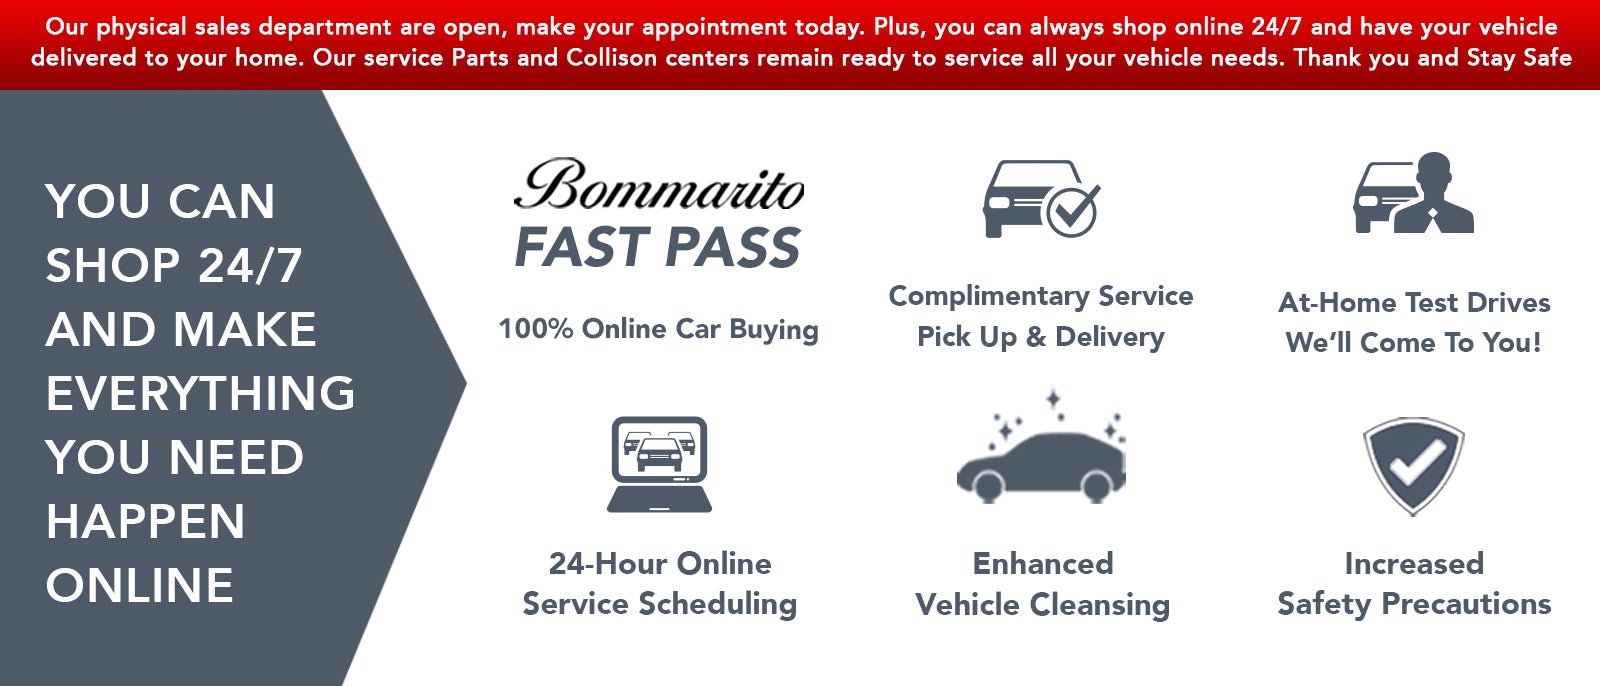 Mazda Dealership | Used Cars in St. Louis, MO | Bommarito Mazda South County